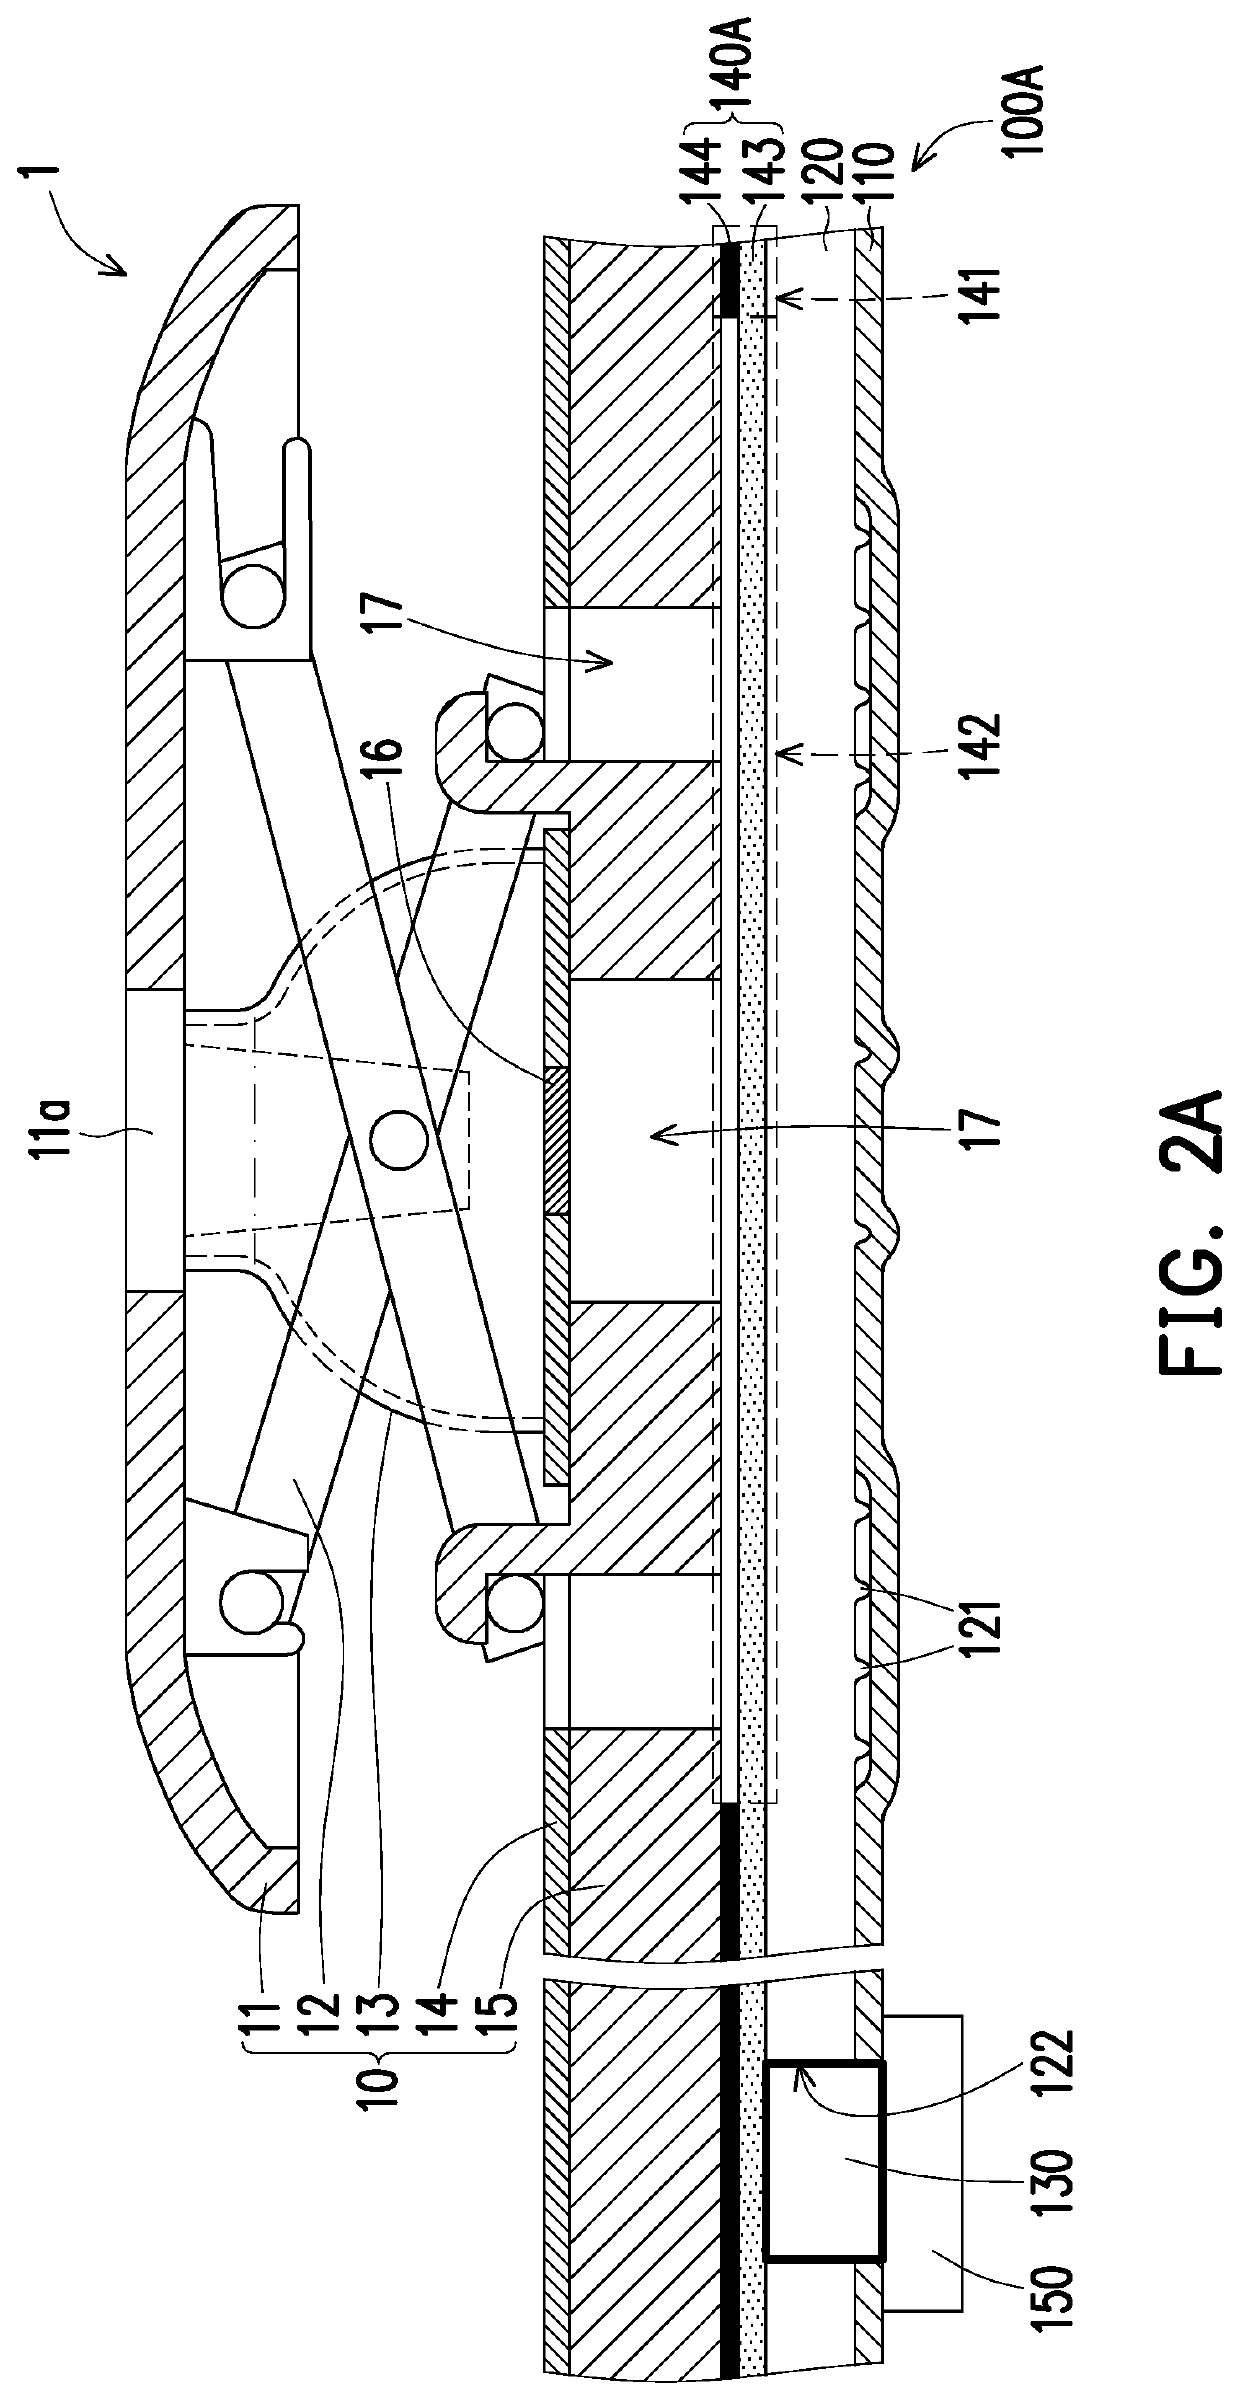 Backlight module and input device